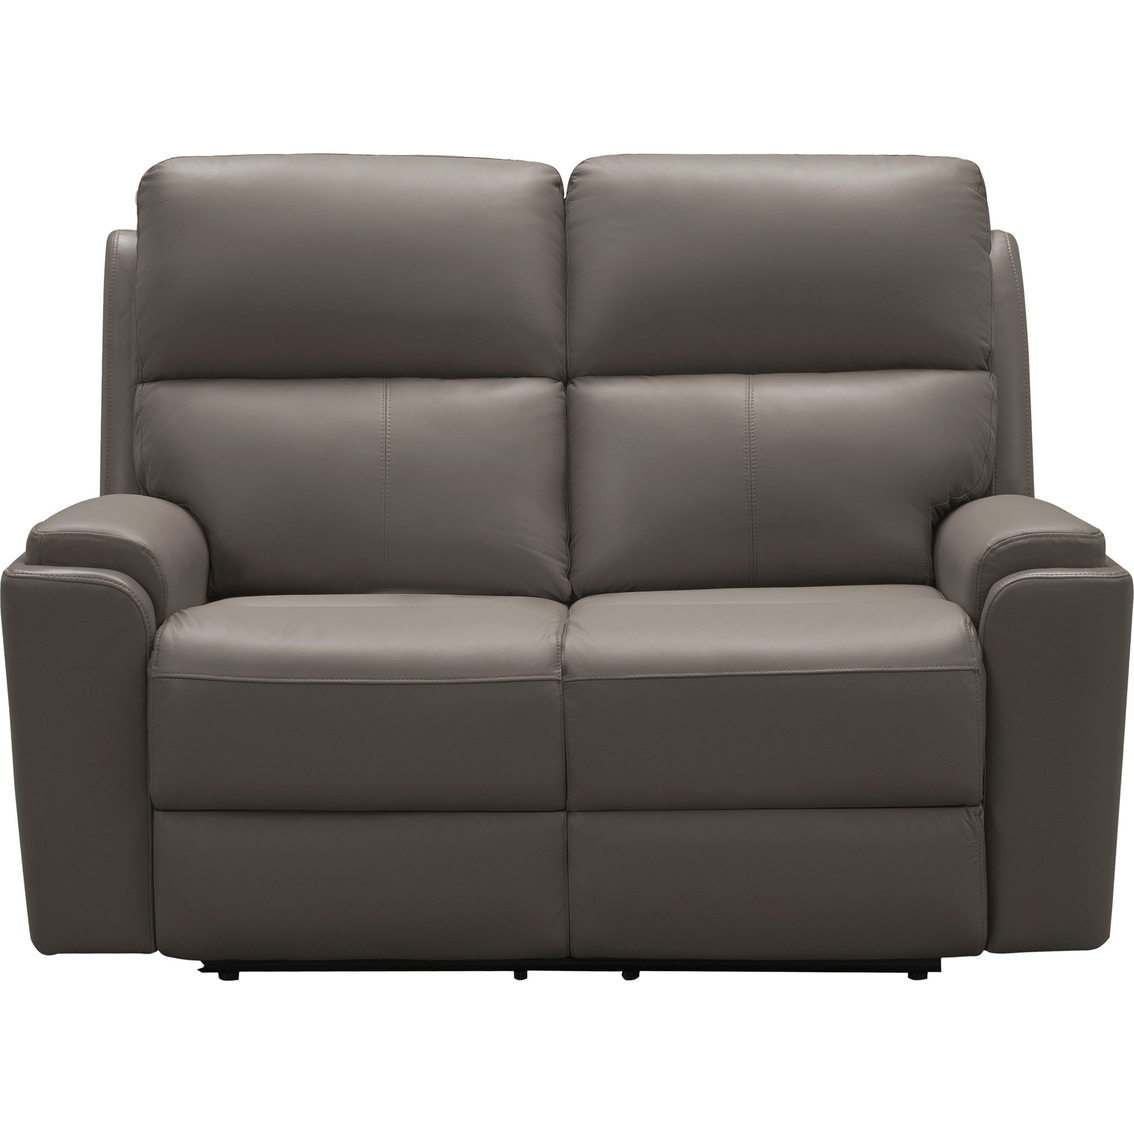 Abbyson Jasper Collection Top Grain Leather Reclining Loveseat - Image 4 of 6